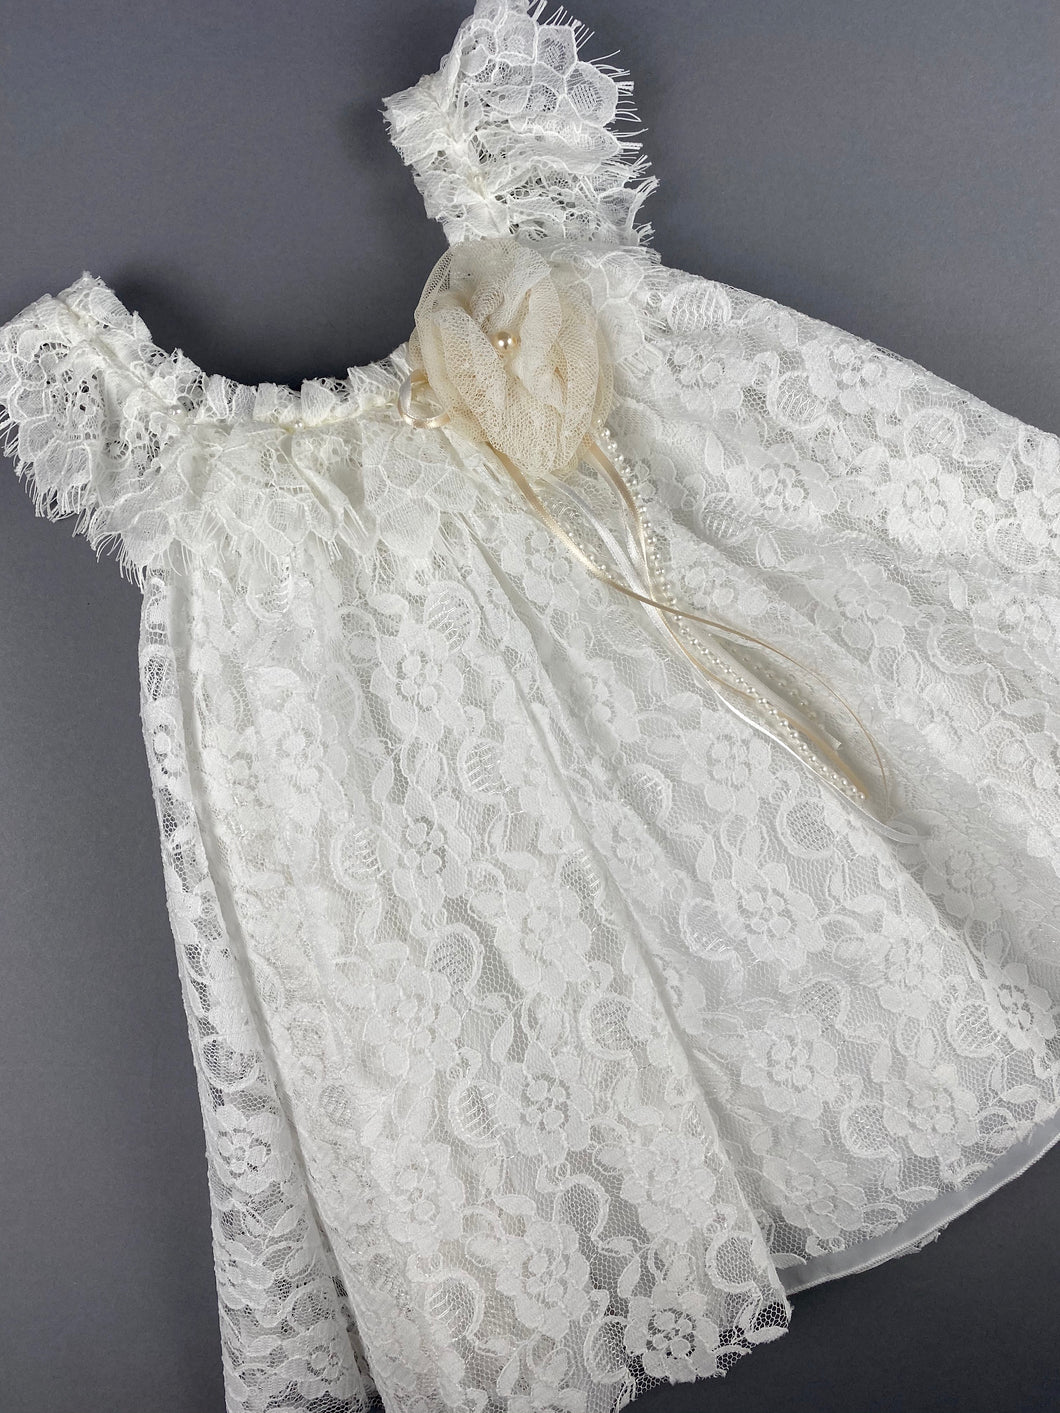 Dress  39 Girls Baptismal Christening Sleeveless  3pc French Lace Dress, matching Bolero and Hat. Made in Greece exclusively for Rosies Collections.